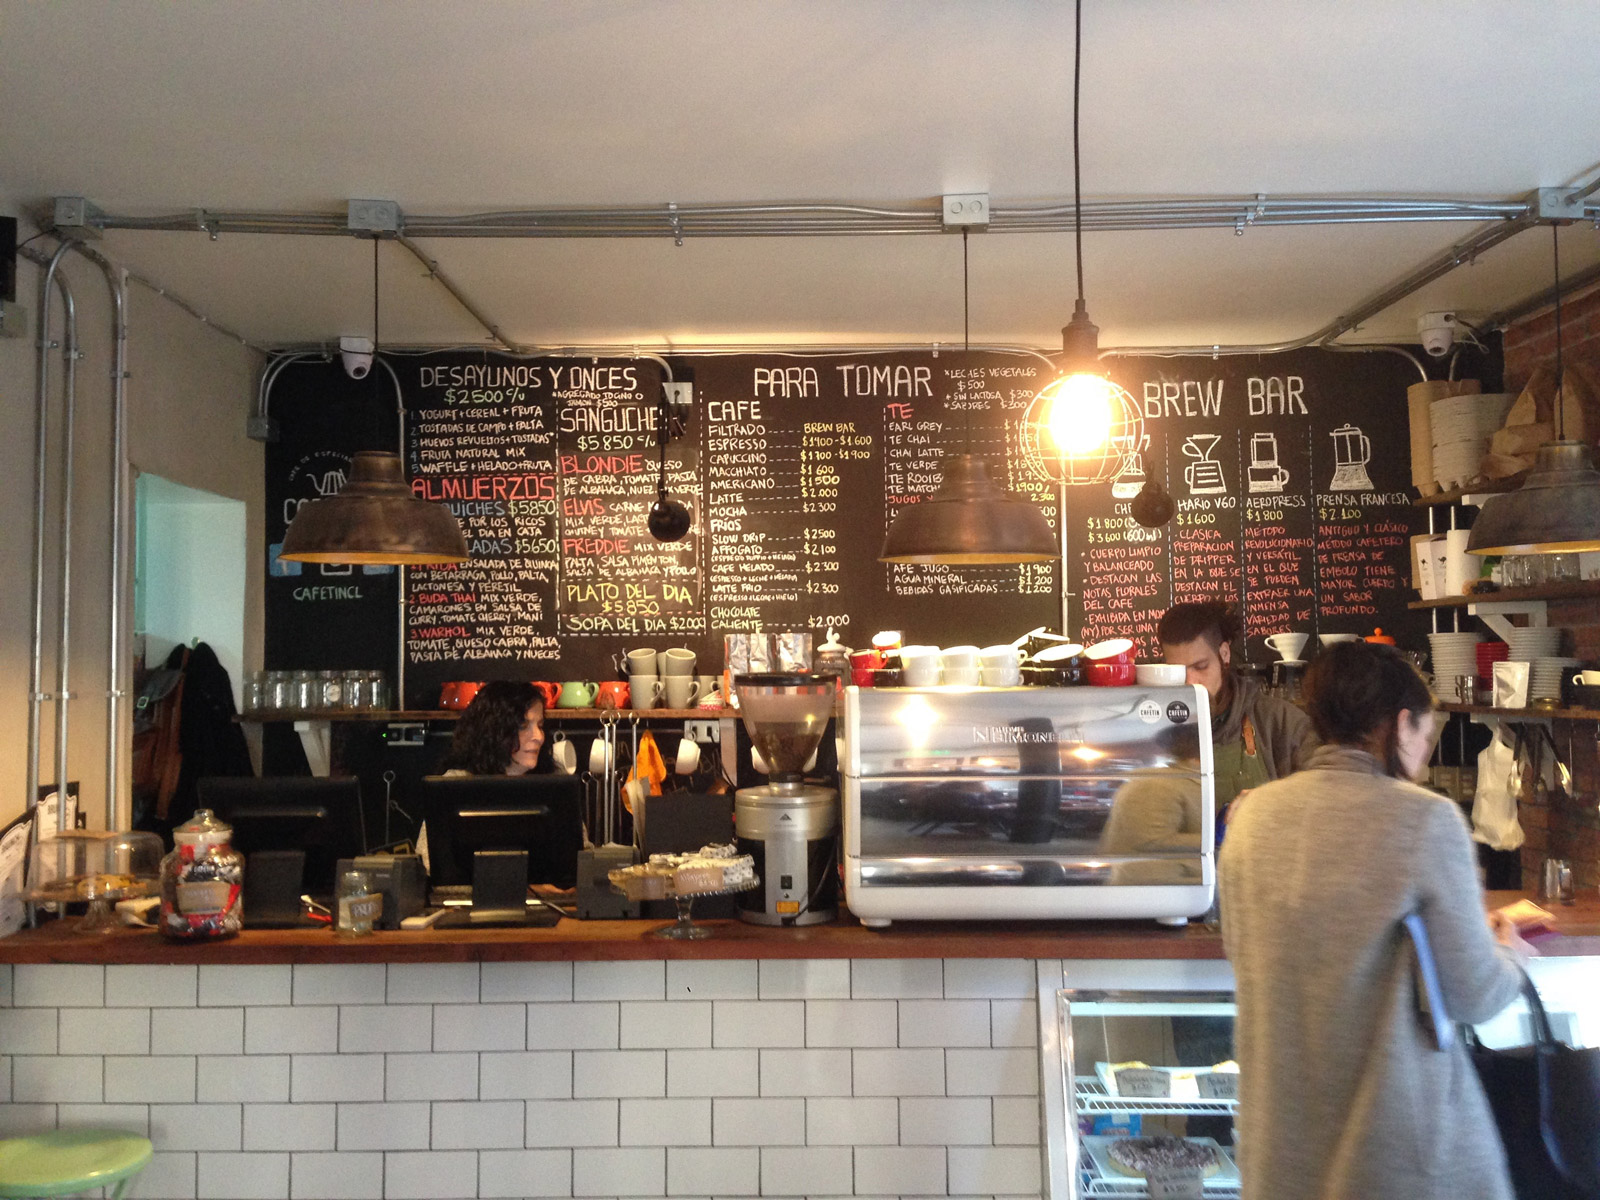 The menu at Cafetín, a great spot for coffee and artisan breakfasts.